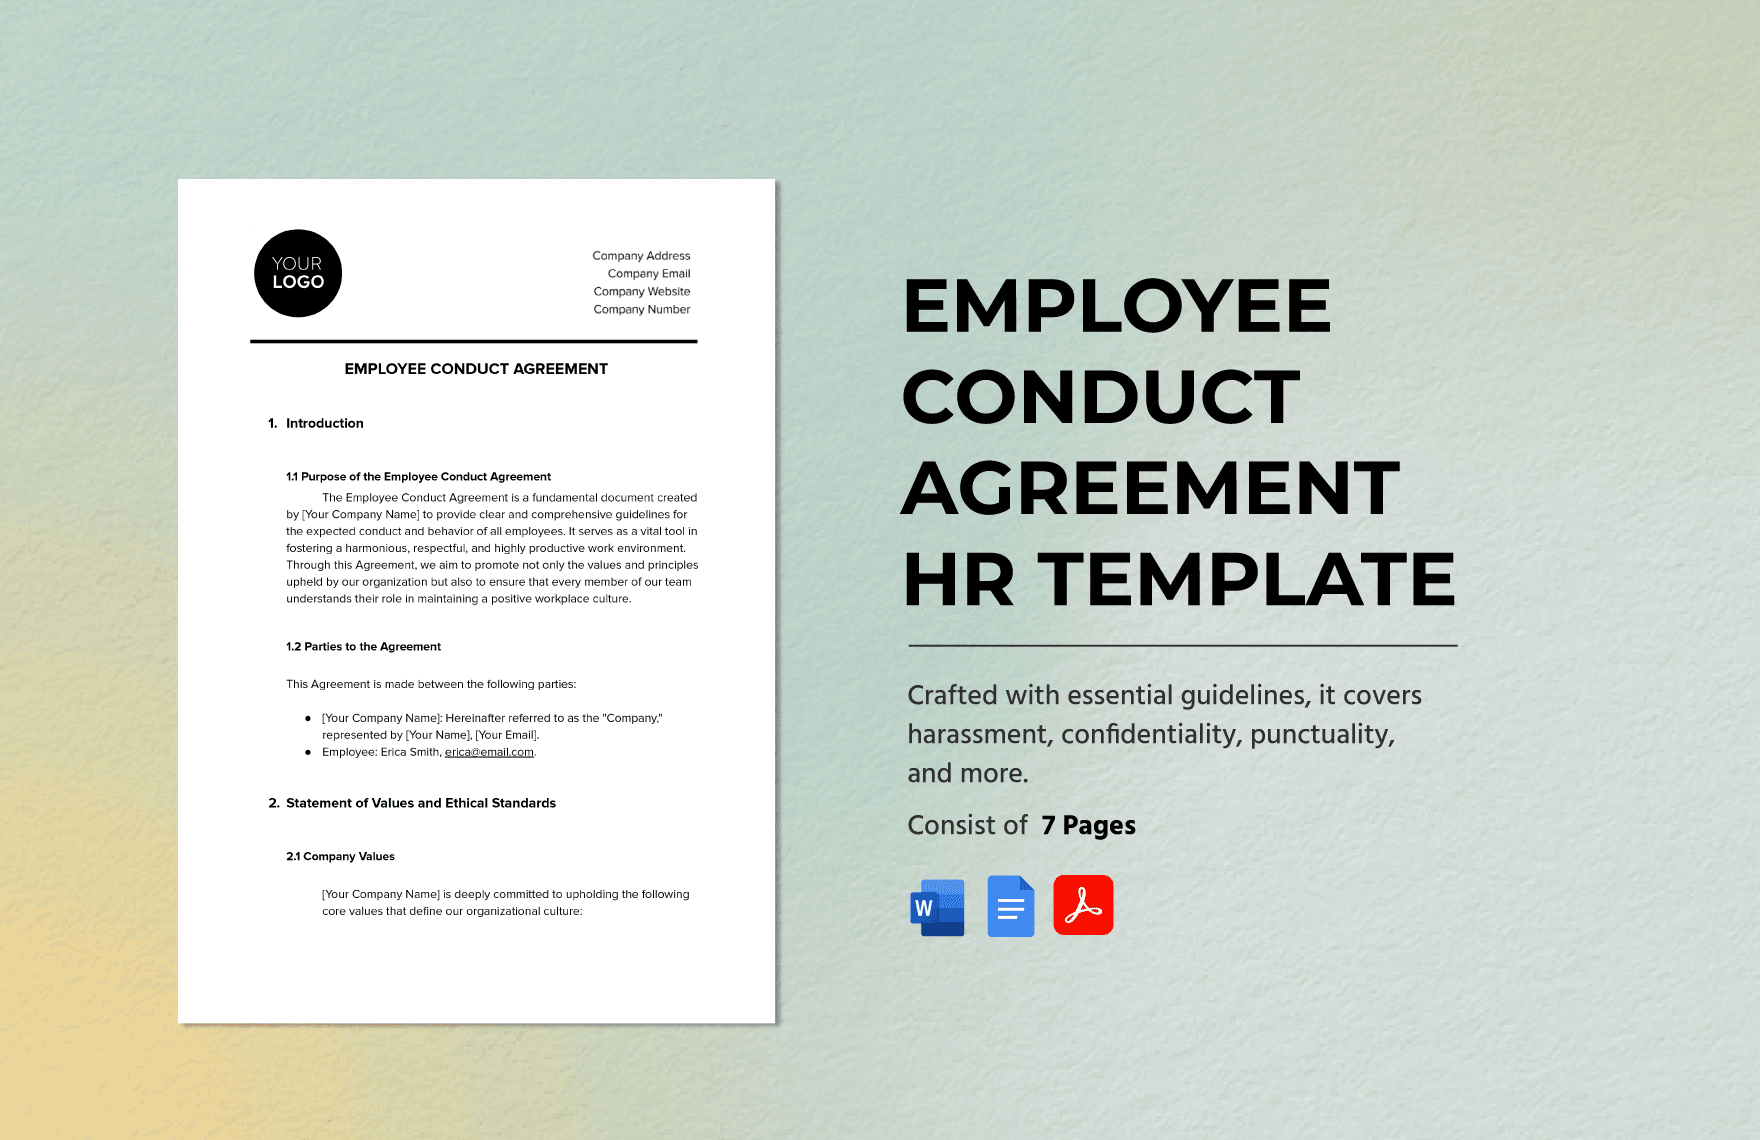 Employee Conduct Agreement HR Template